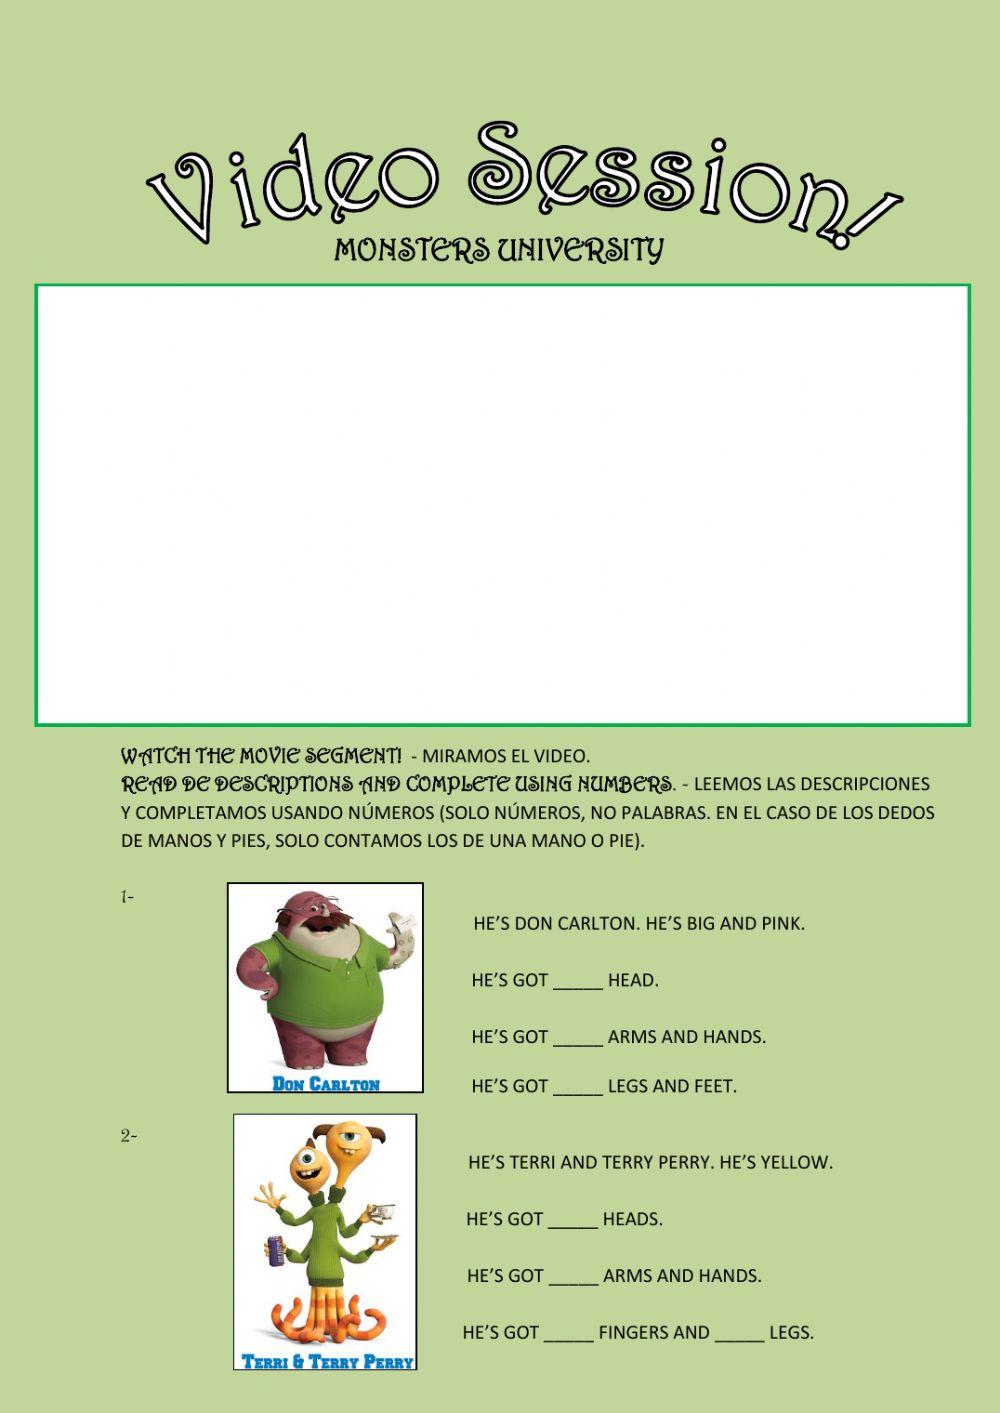 Video Session: Monsters University